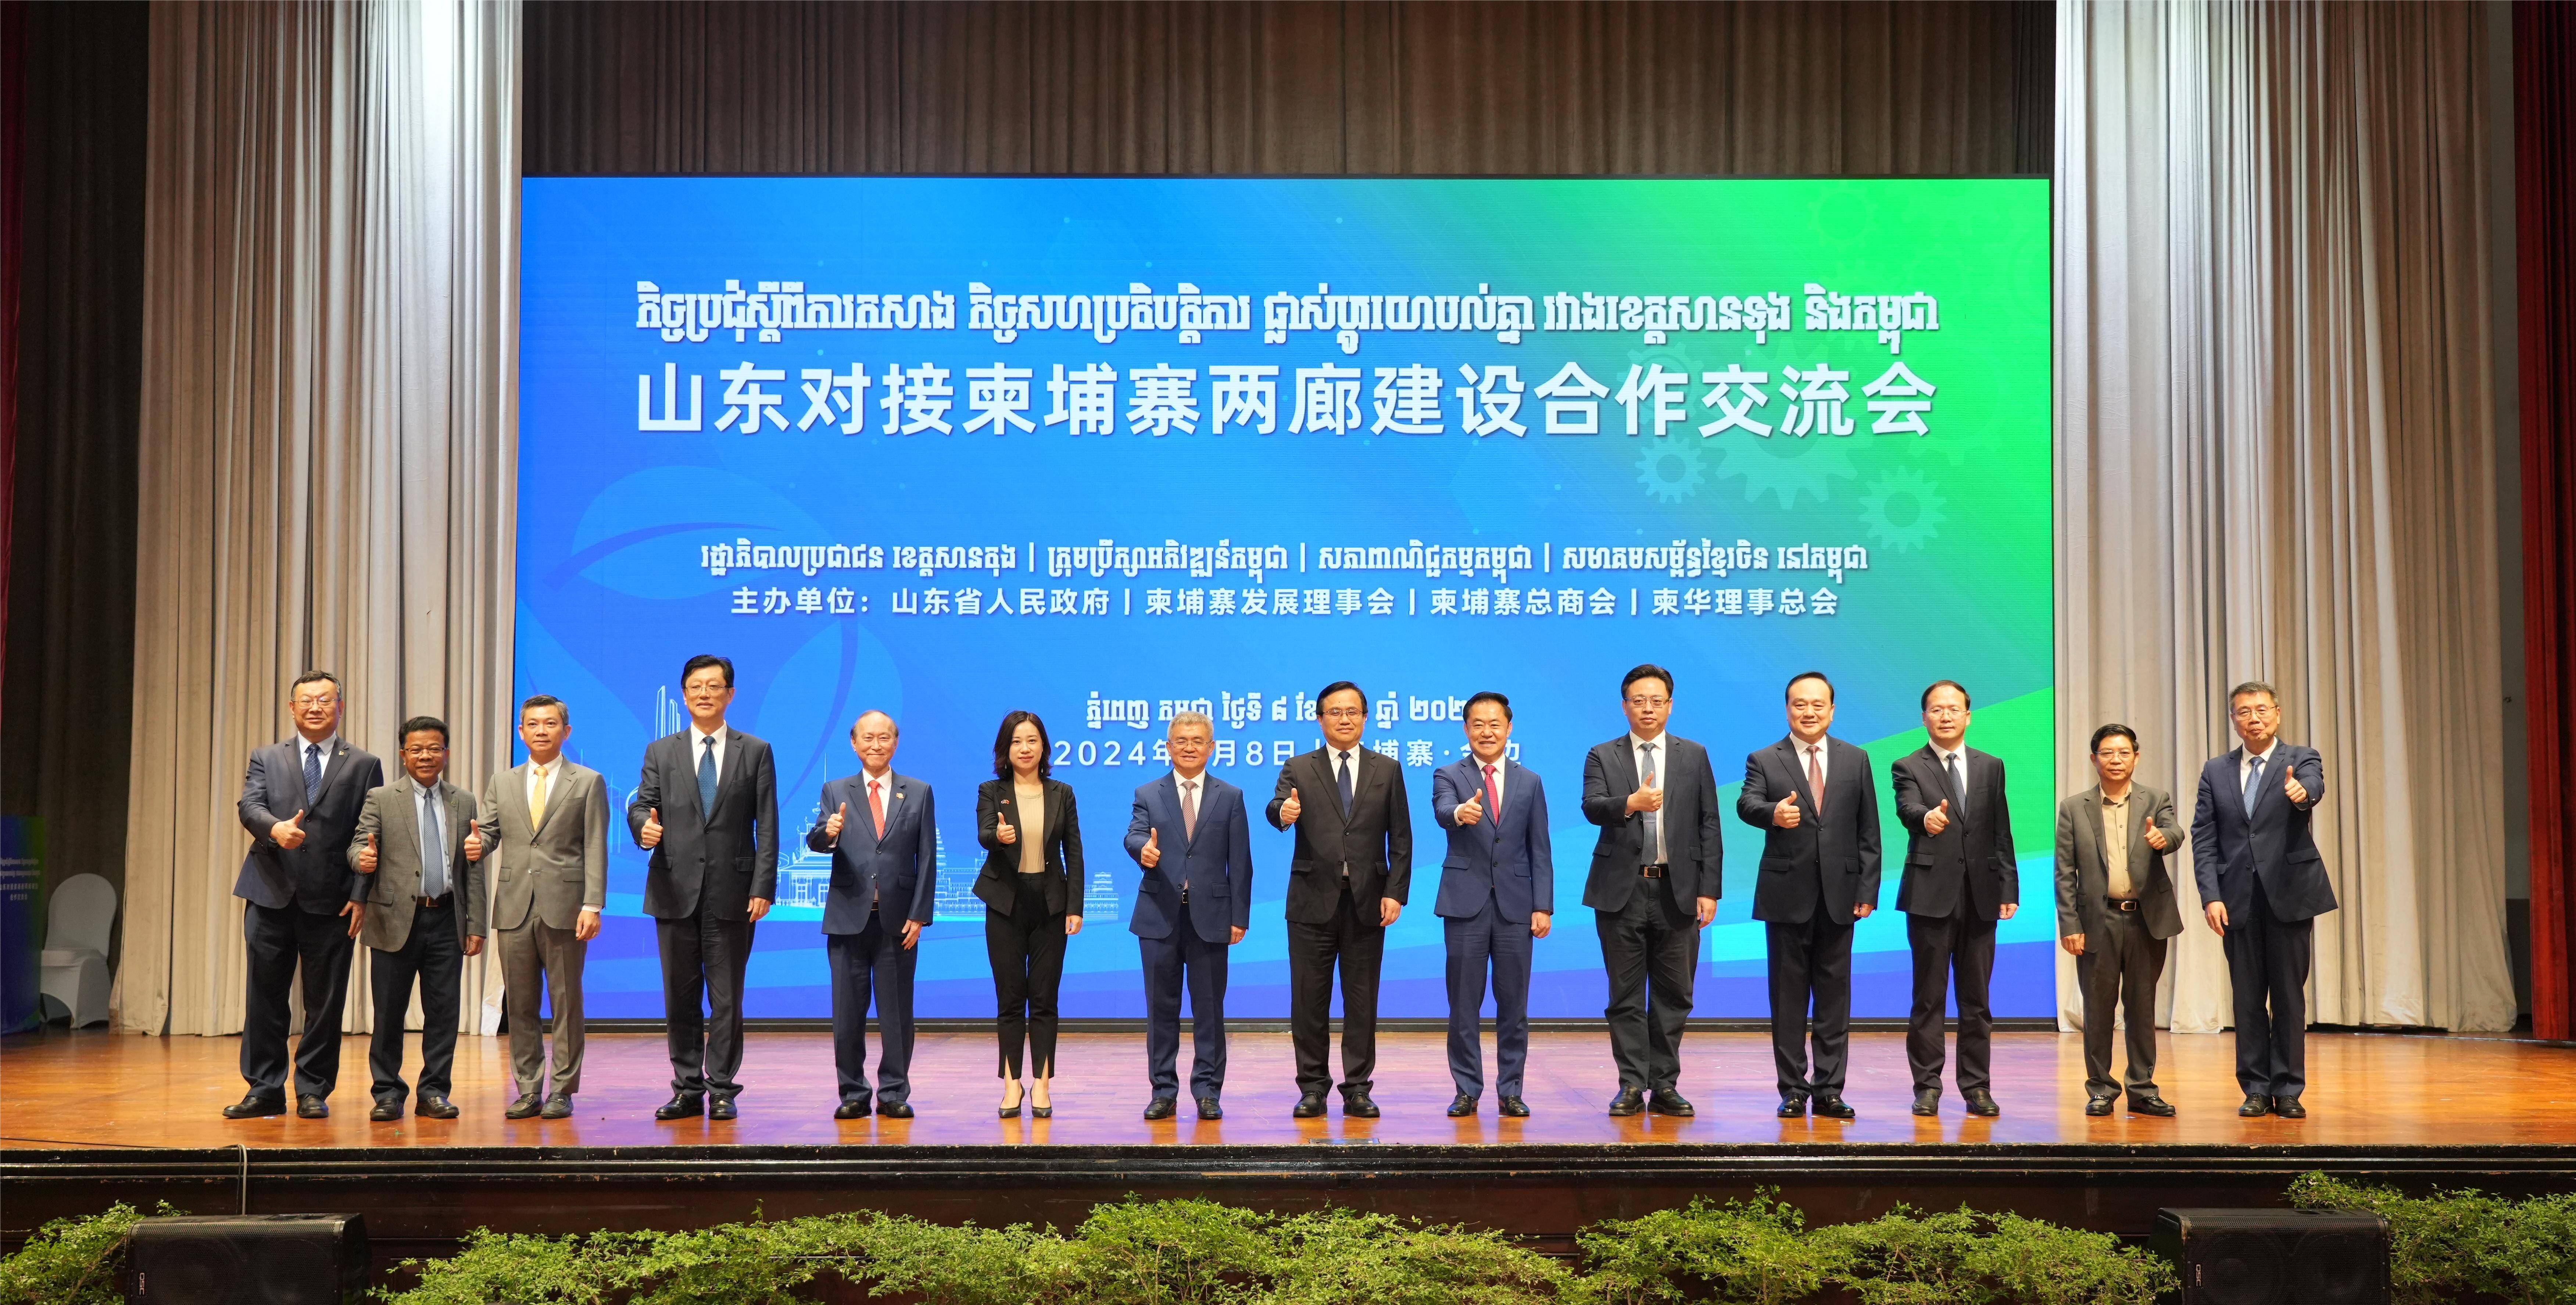  Business Vision | Shandong Provincial Government Delegation Visiting Indonesia, Cambodia and Vietnam